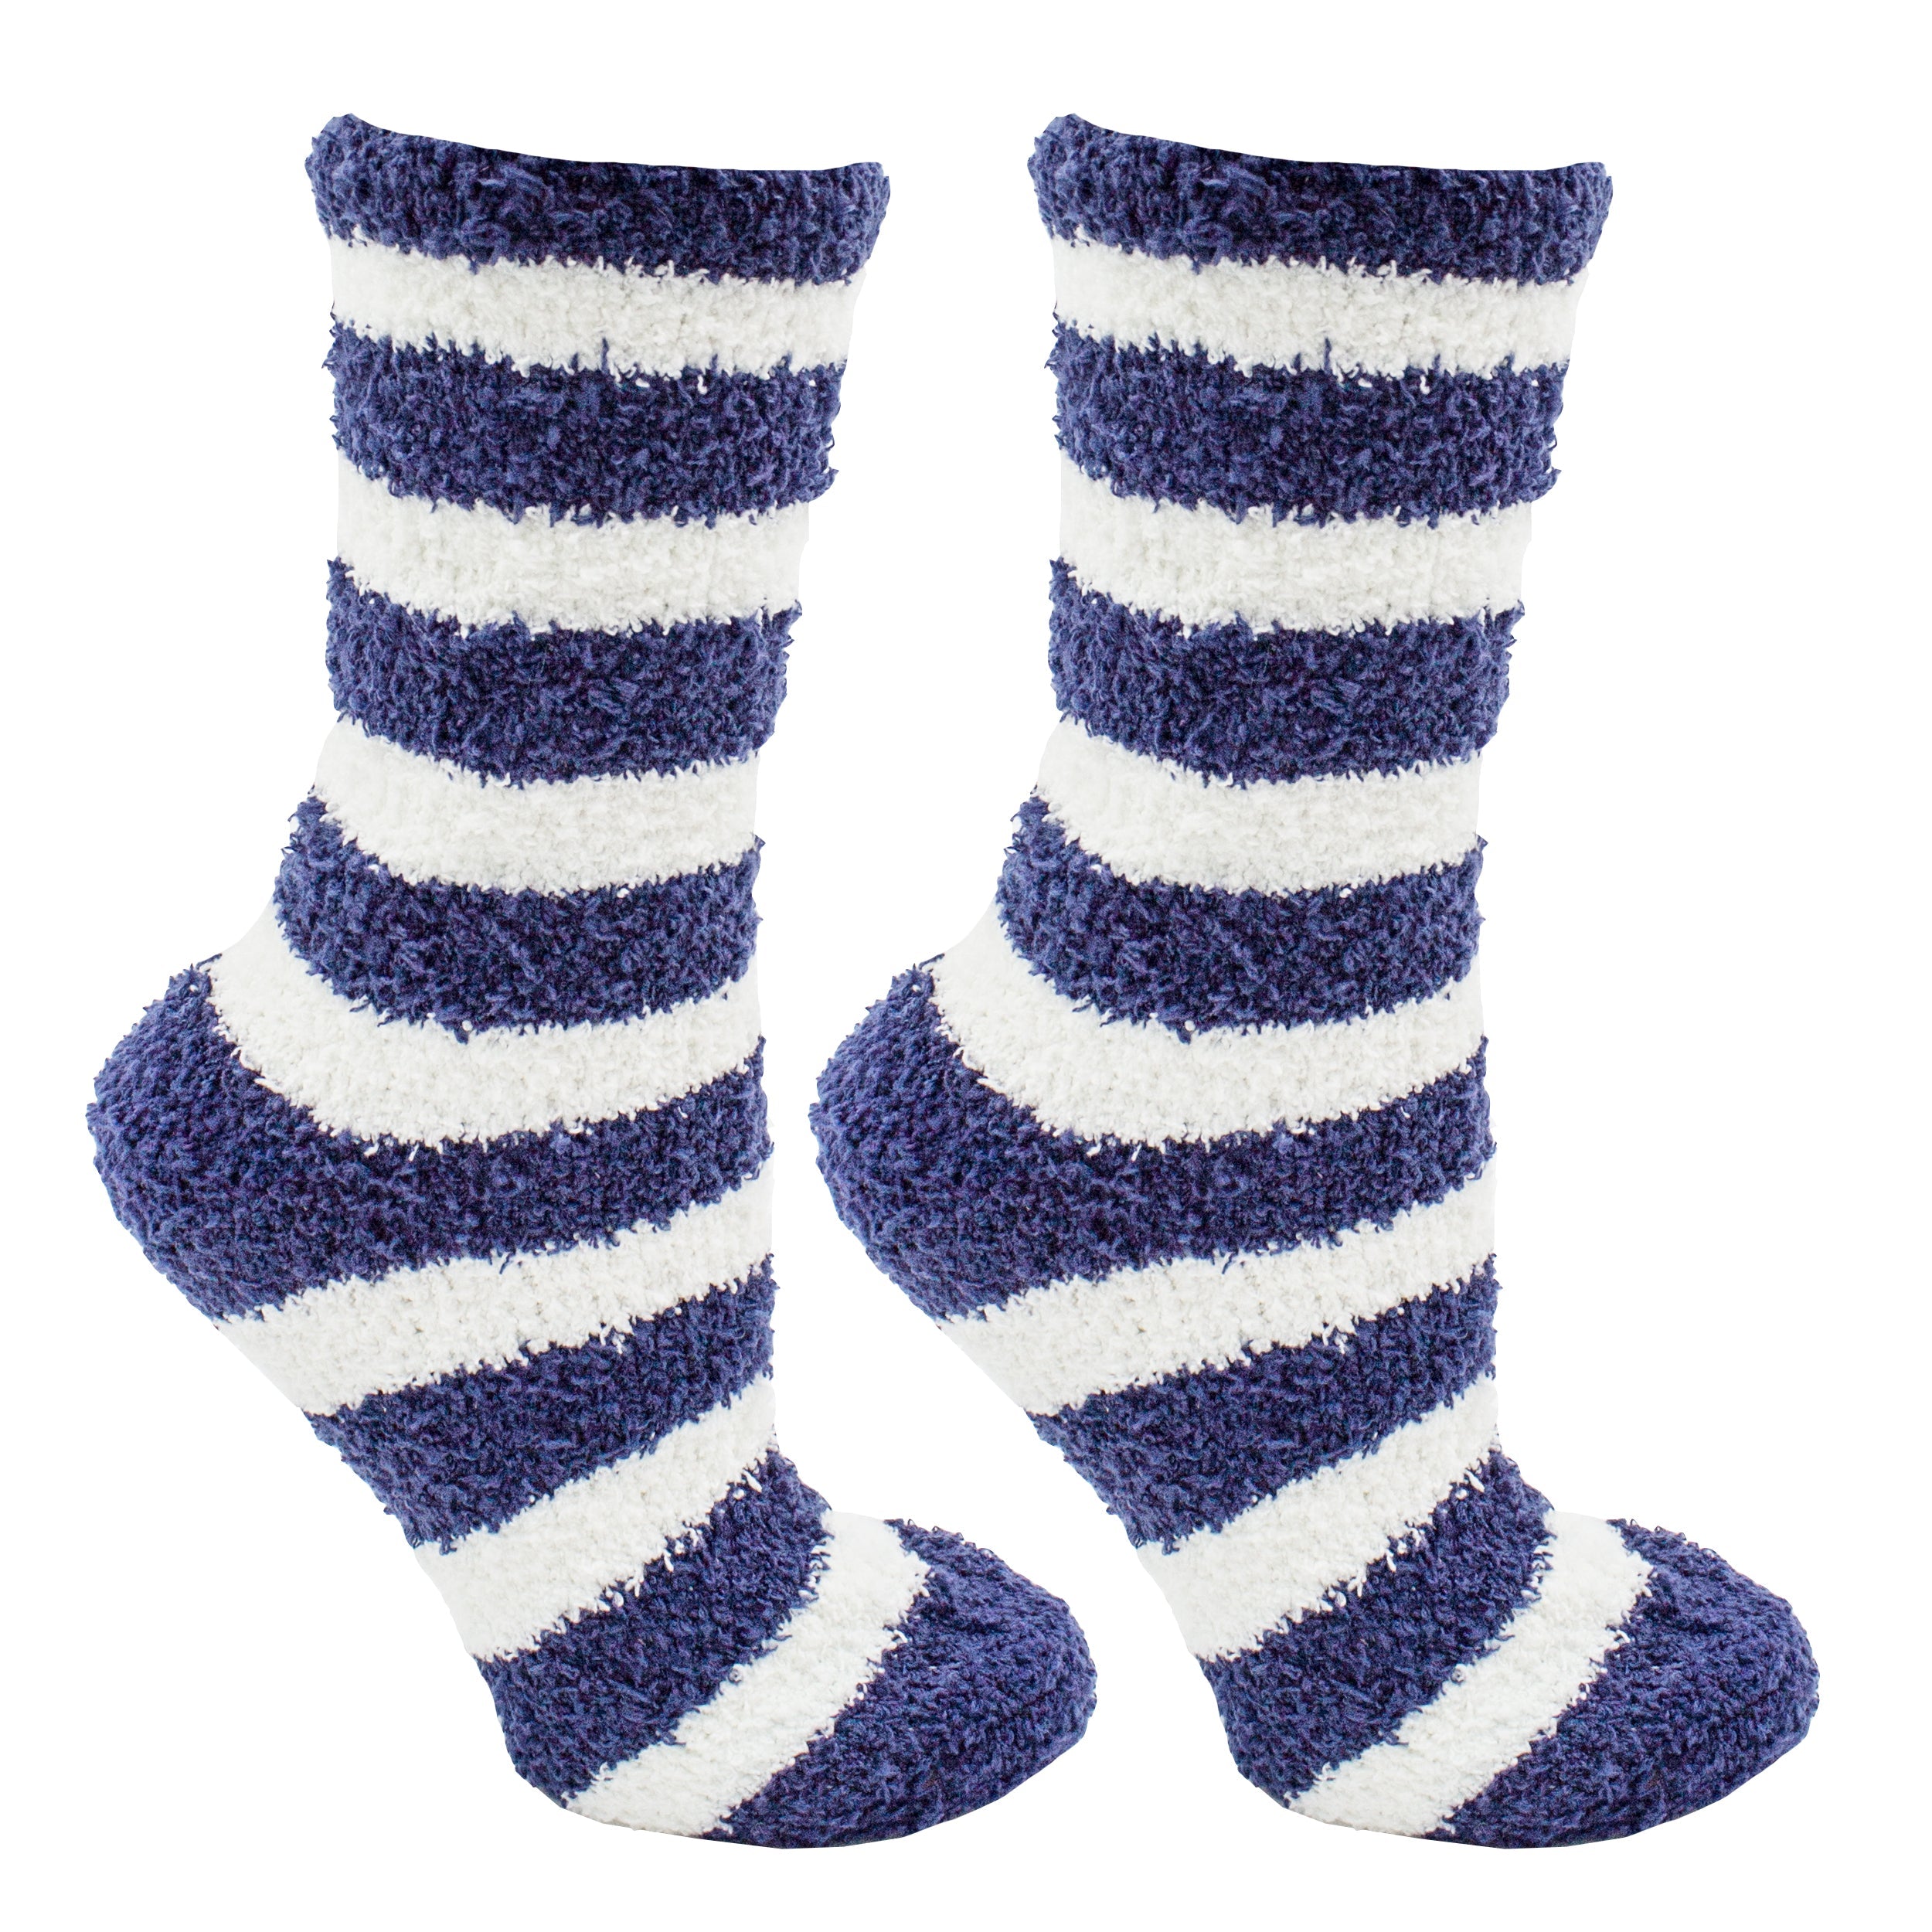 Non-Skid Cuddly Pets Anmial Slipper Socks With Lavender Infused